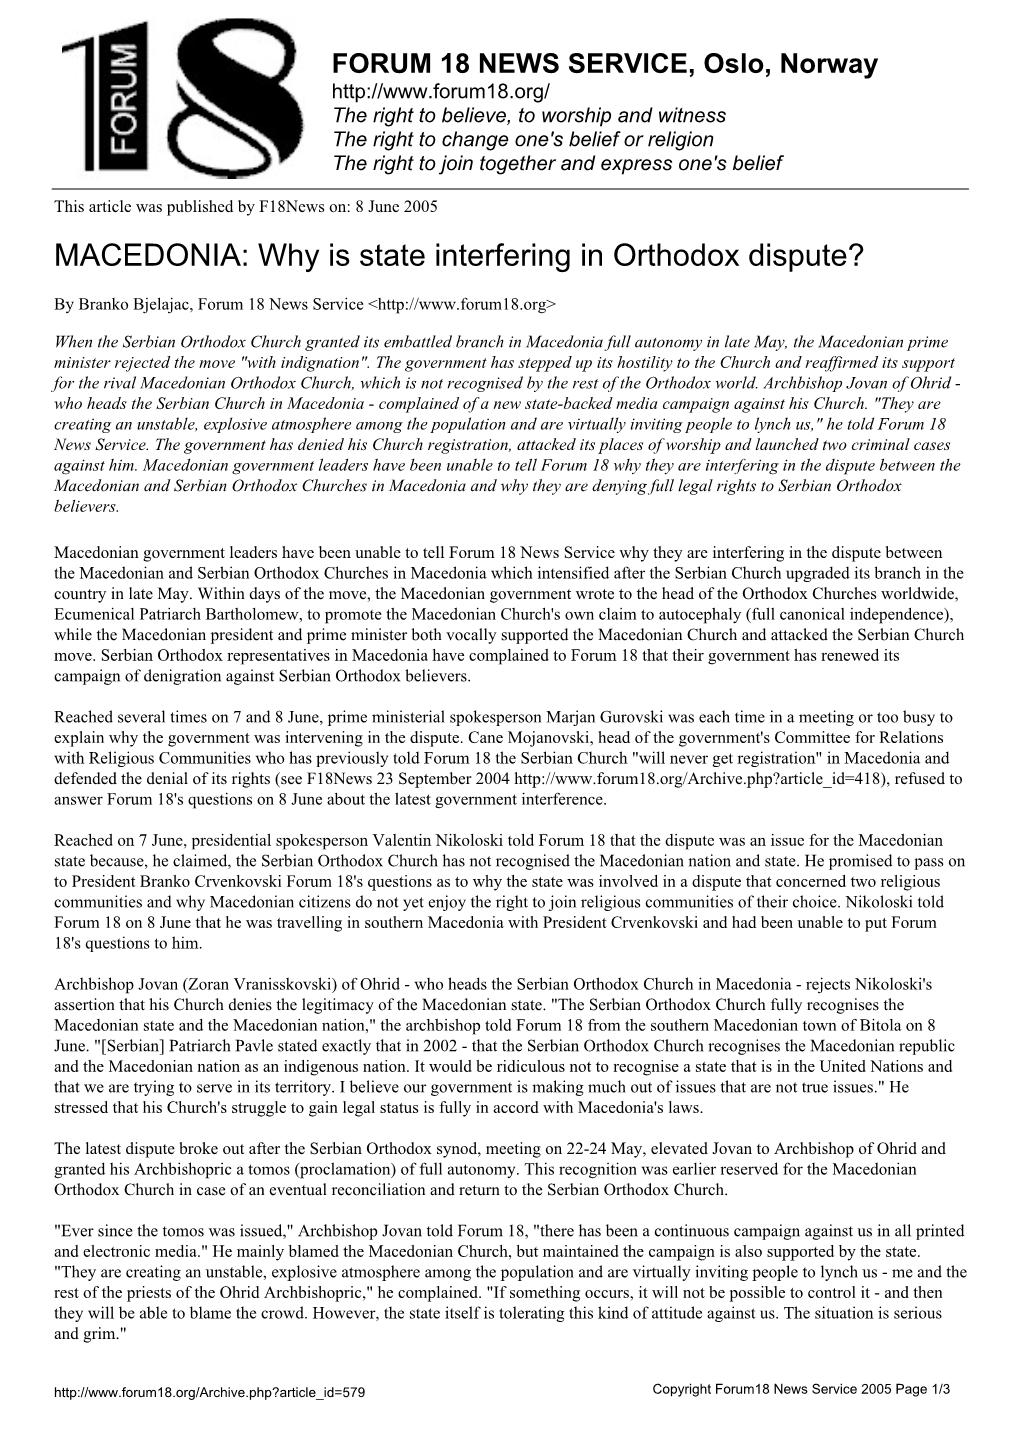 Why Is State Interfering in Orthodox Dispute?